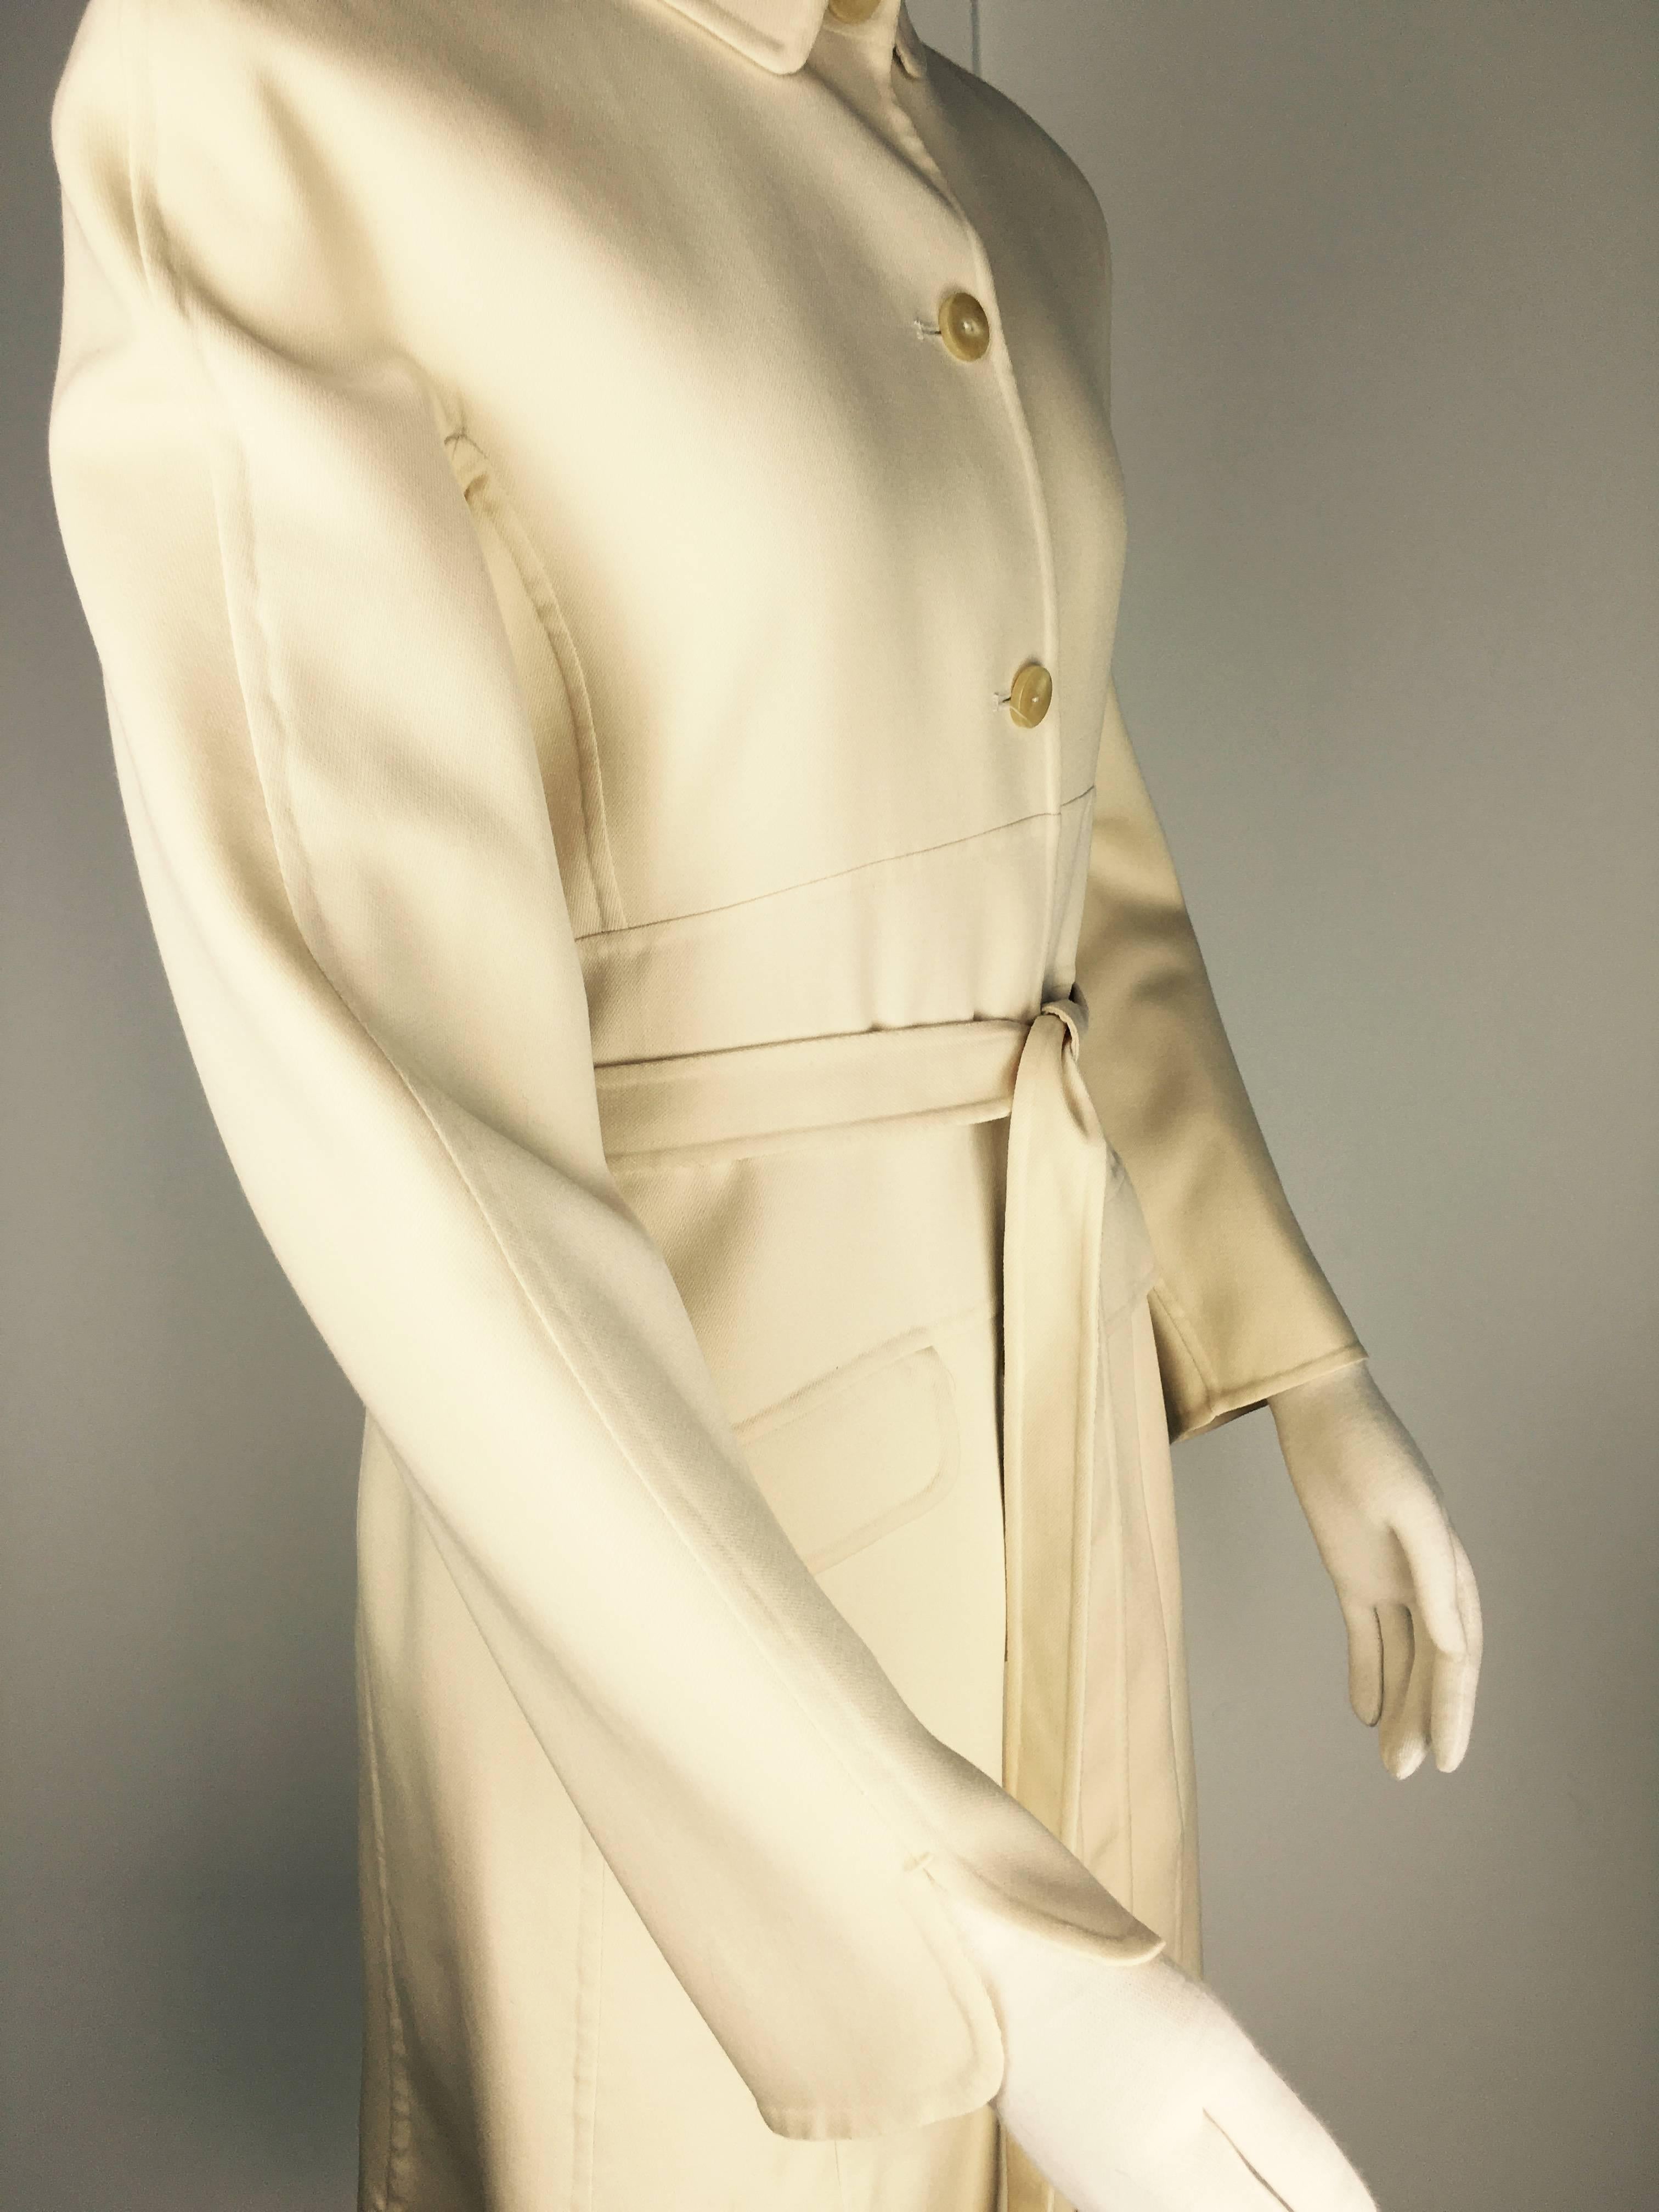 Classic Chado Ralph Rucci belted cream wool coat. Notched sleeves, 
flap pockets and top stitched midriff bands. Separate belt that can be tied around the waist; trench-coat style.  Gorgeous smooth polished buttons.
A piece of incredible